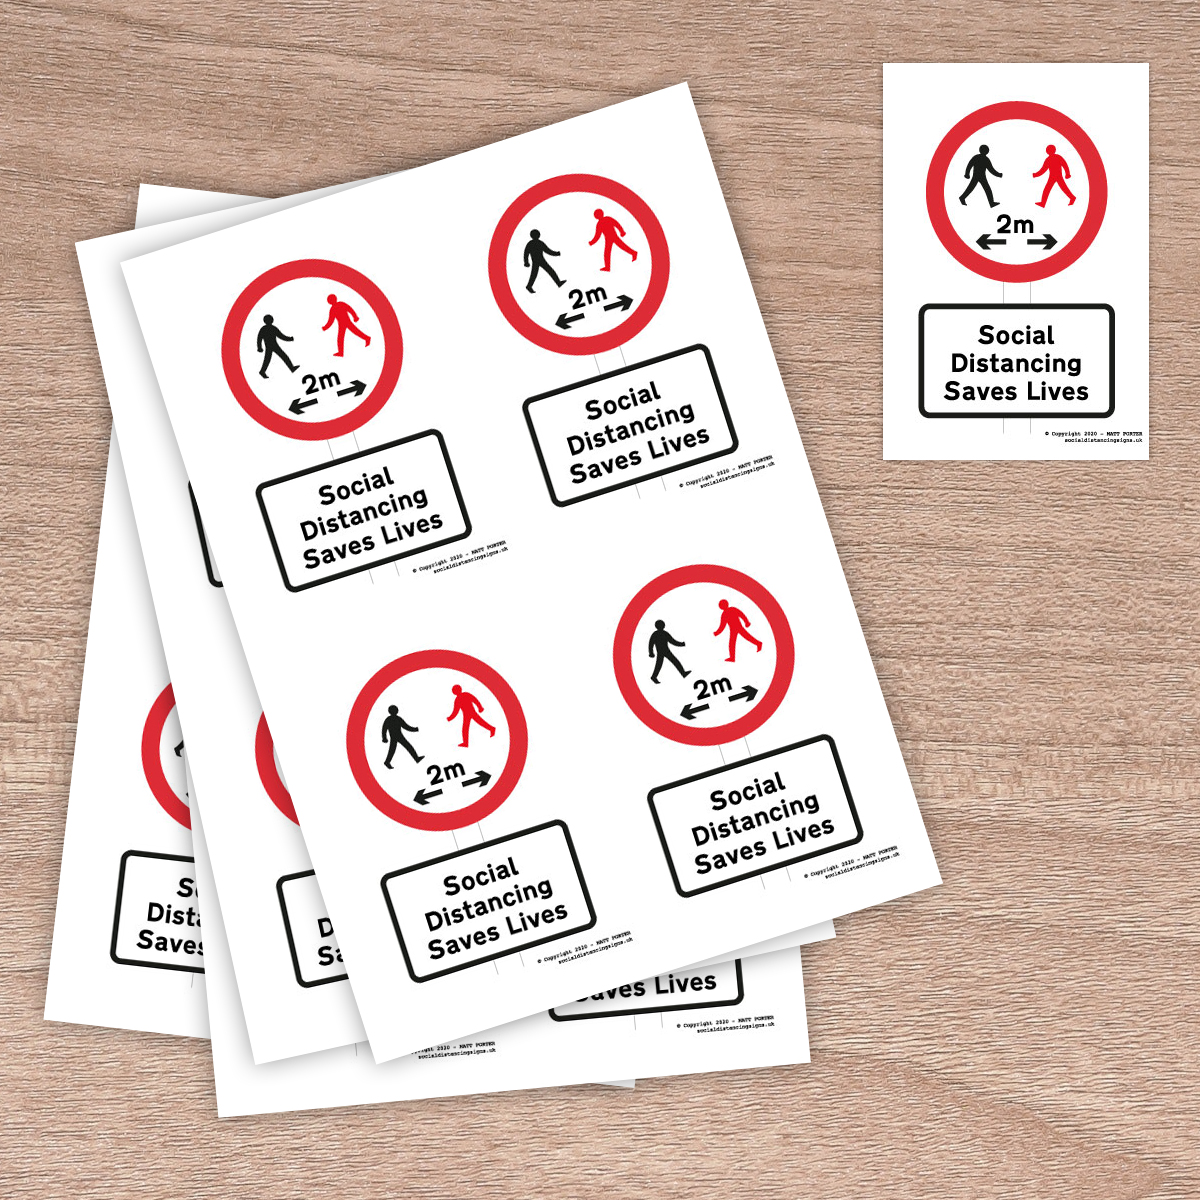 Social Distancing Saves Lives (140mm x 94mm) Warning / Reminder Stickers